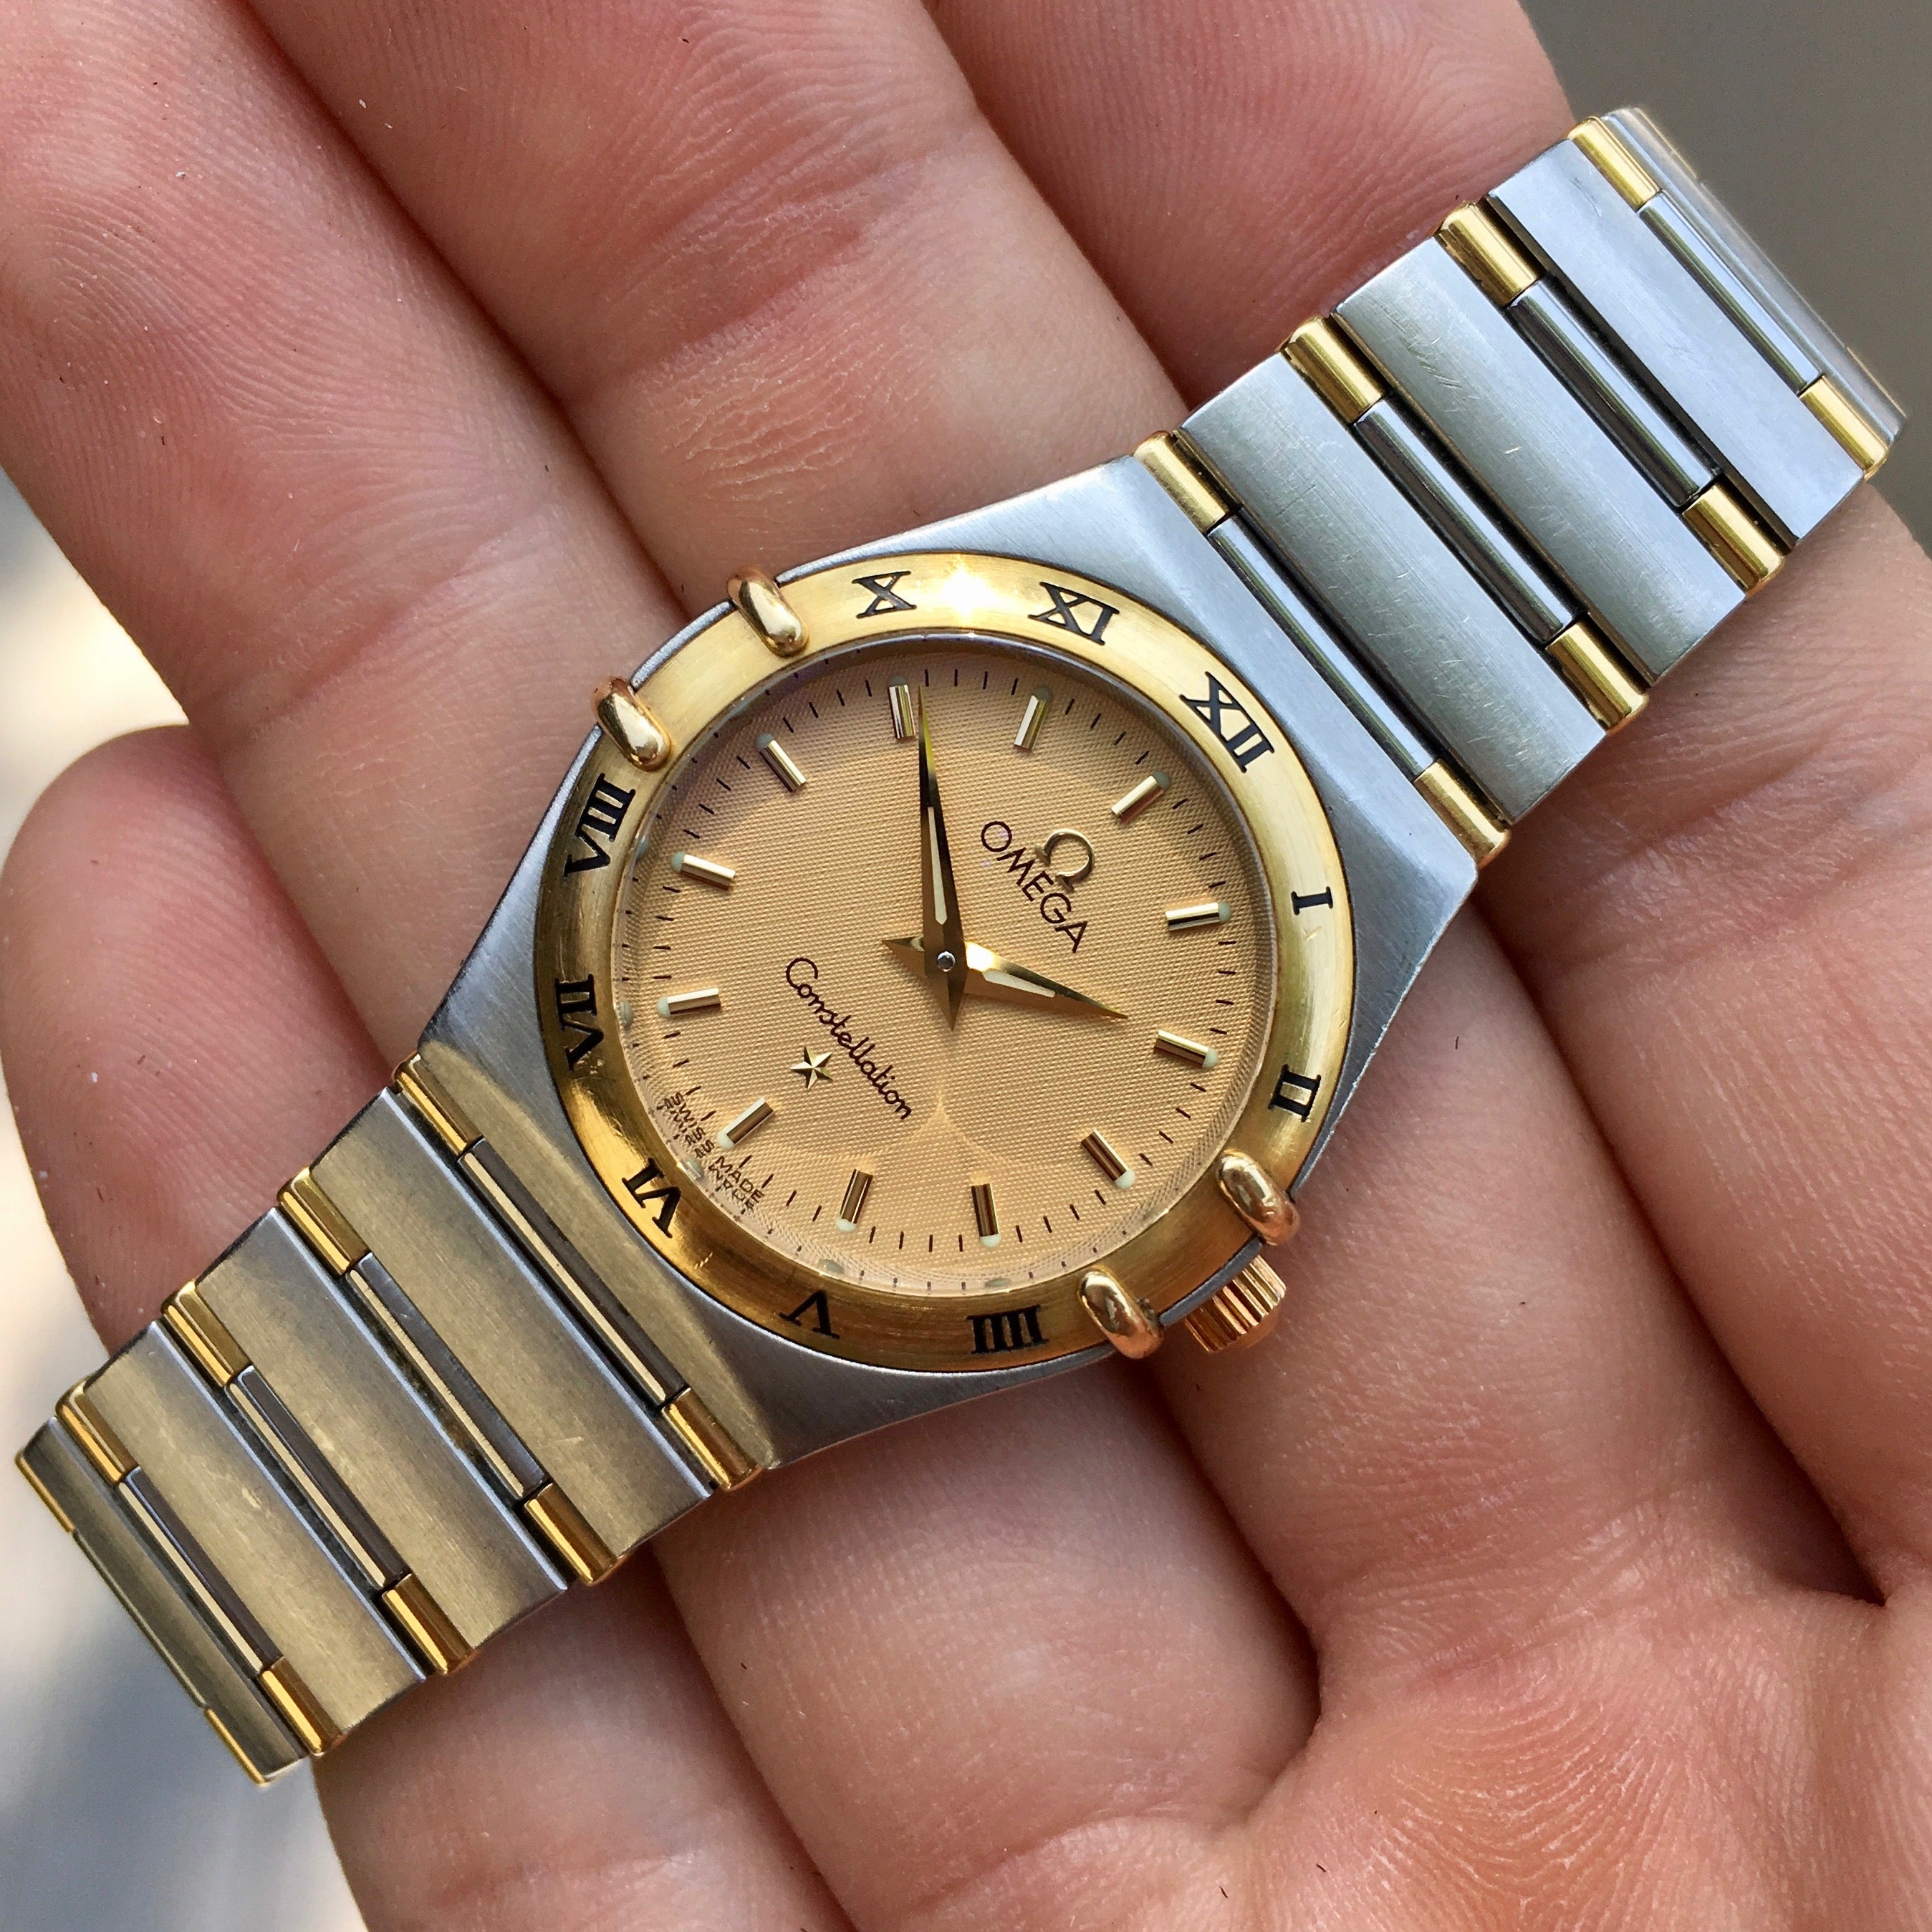 omega two tone ladies watch